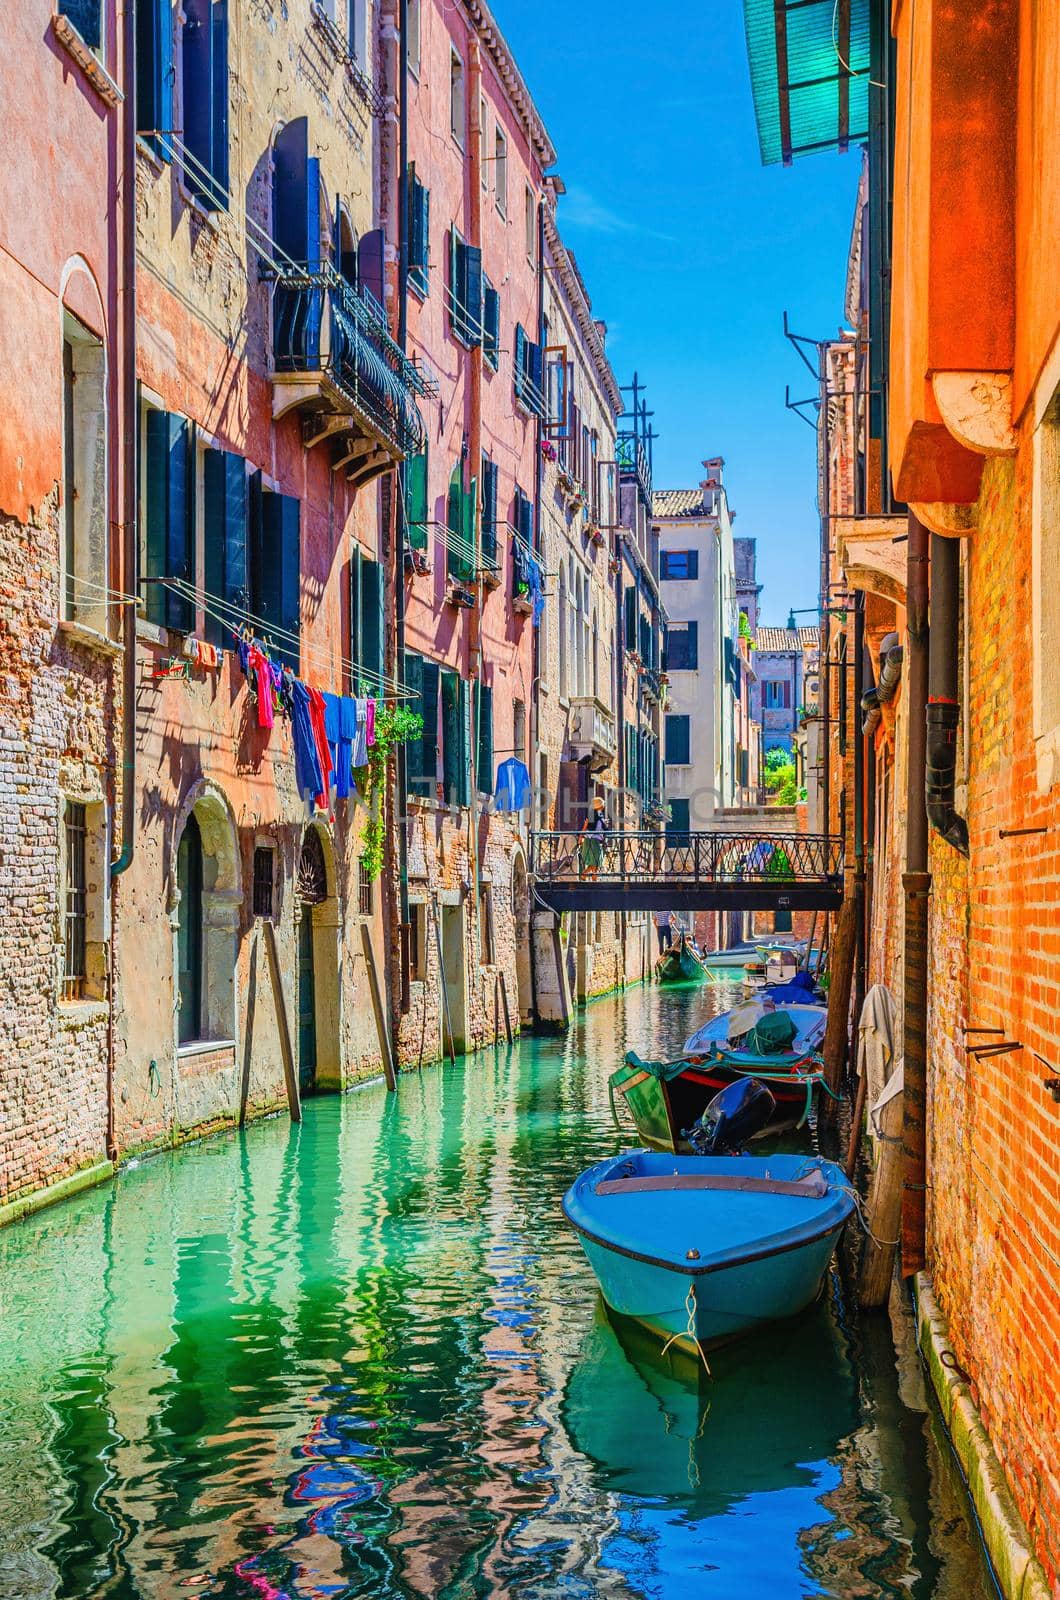 Venice cityscape with narrow water canal with boats moored between old colorful buildings and bridge, Veneto Region, Northern Italy. Typical Venetian view, vertical view, blue sky background